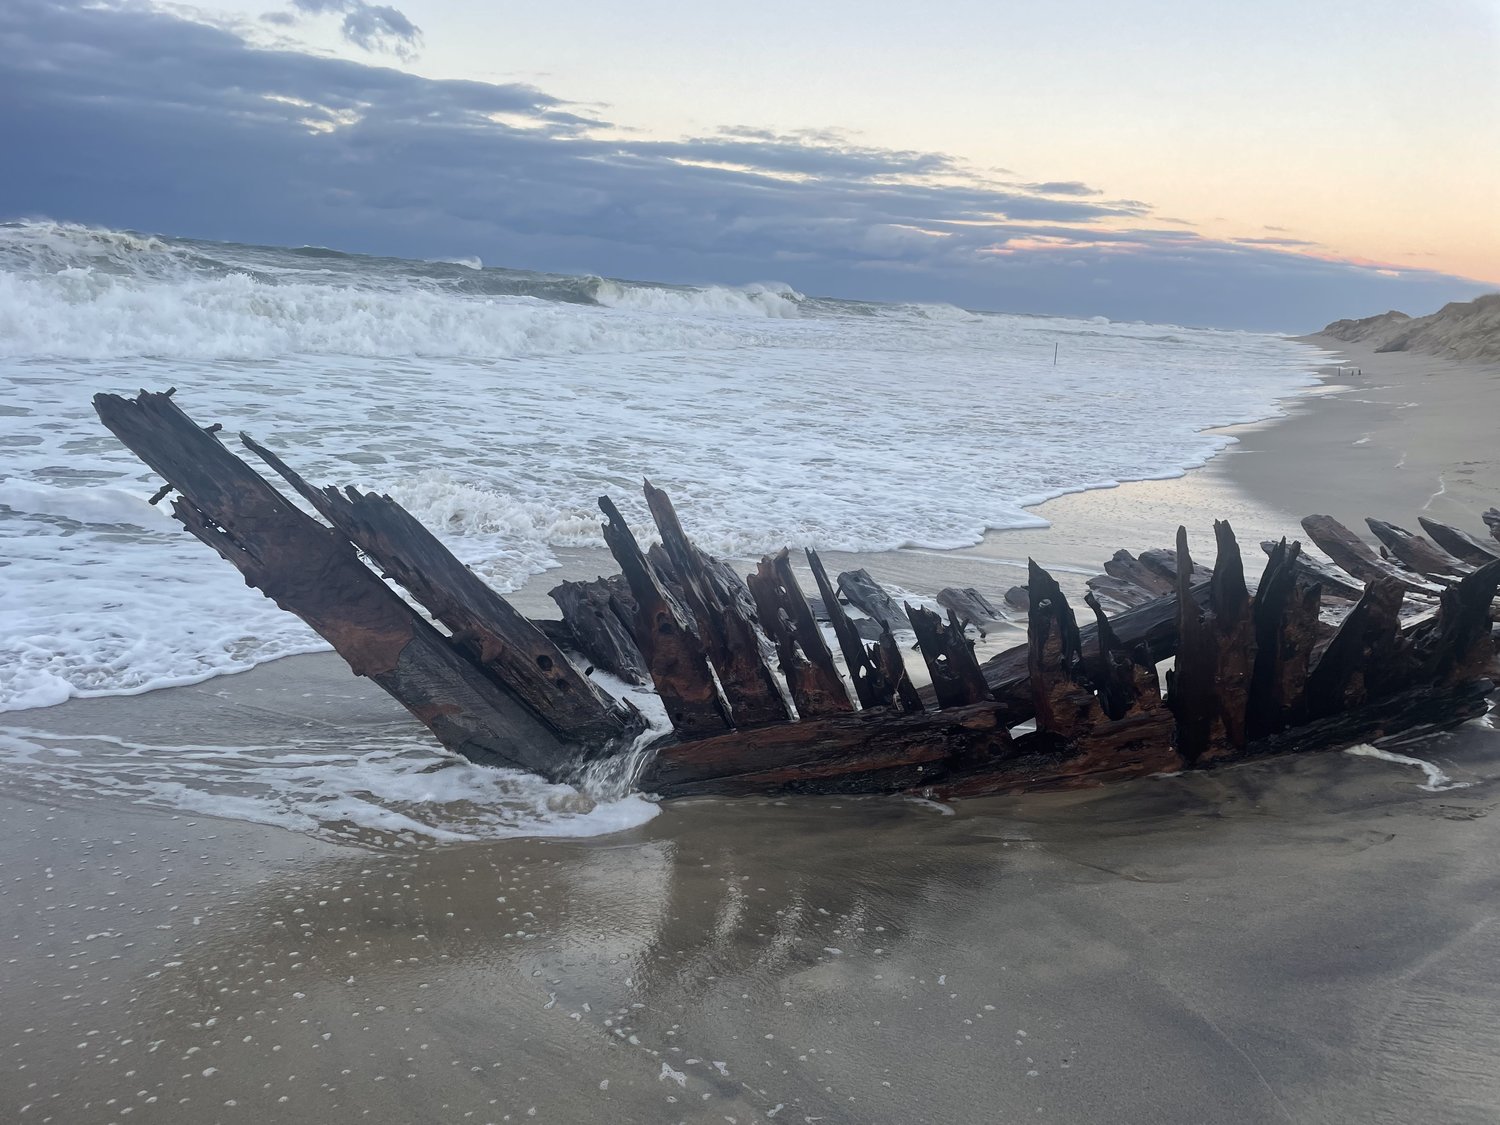 Wreckage on the south shore of the island in December.